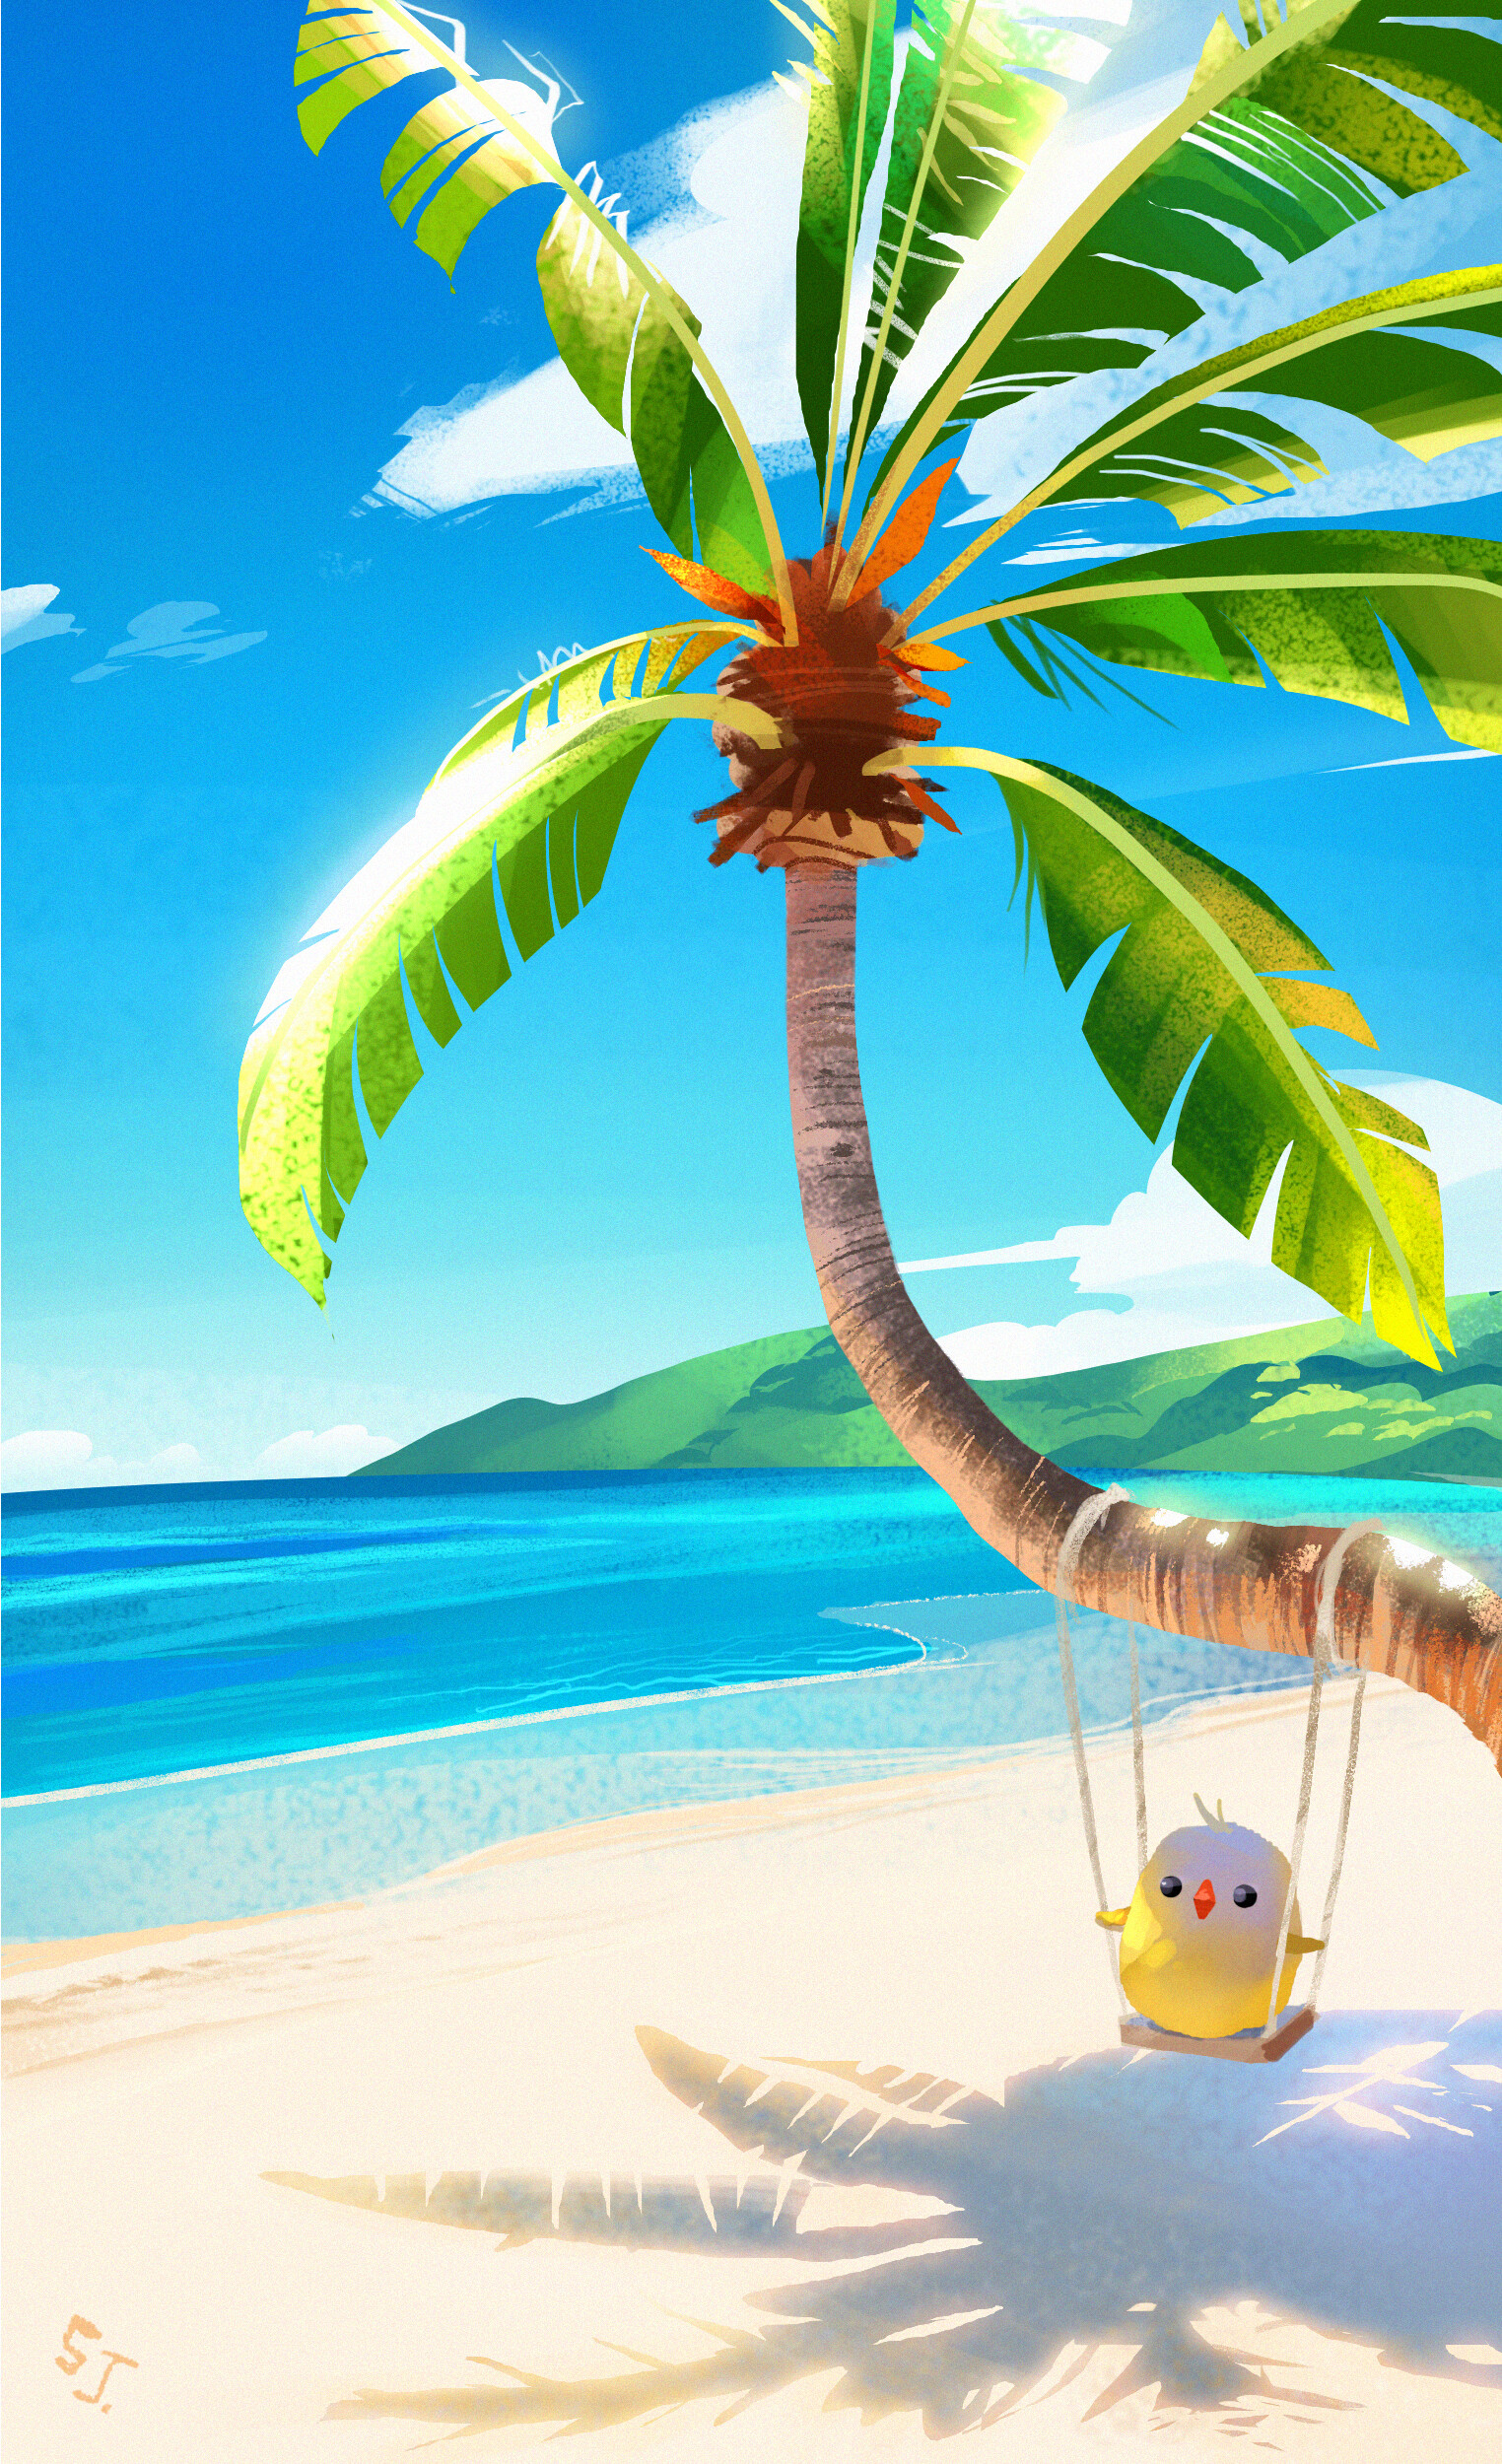 Background for tablet devices art, bird, swing, beach